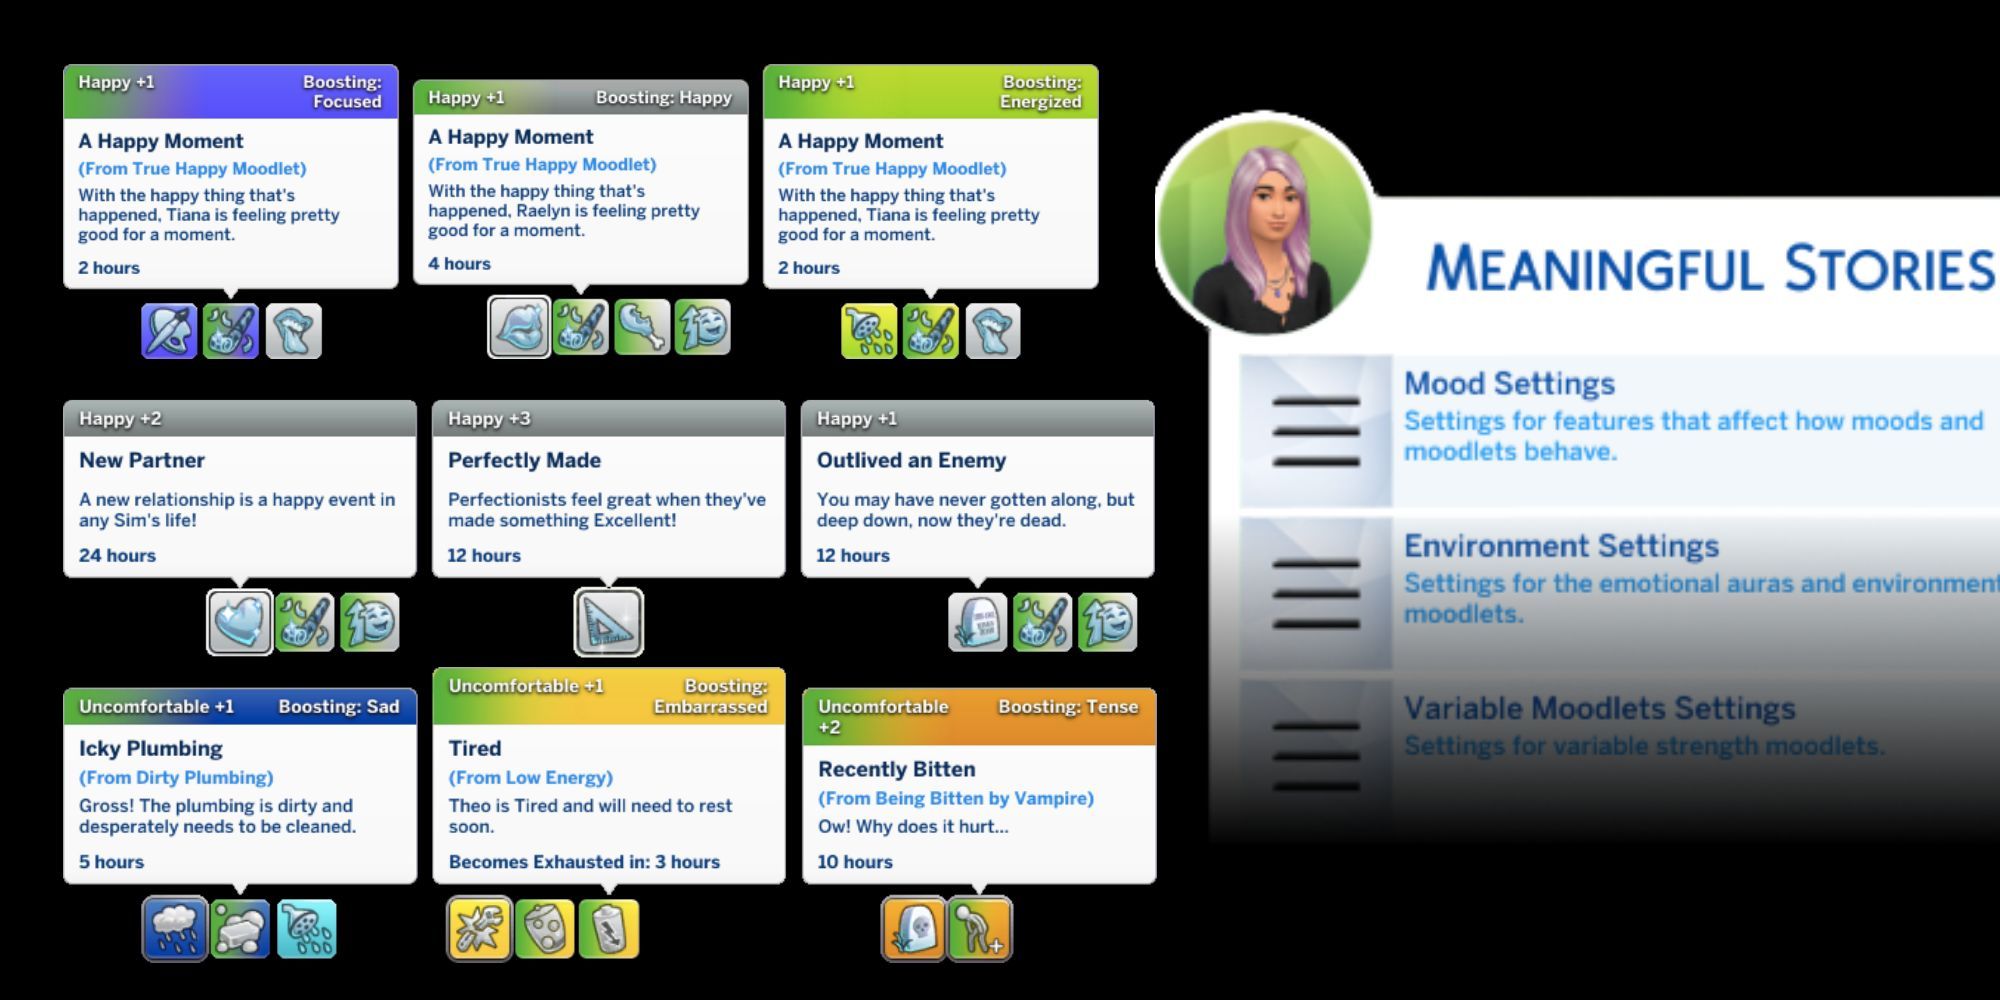 The Sims 4 Meaningful Stories